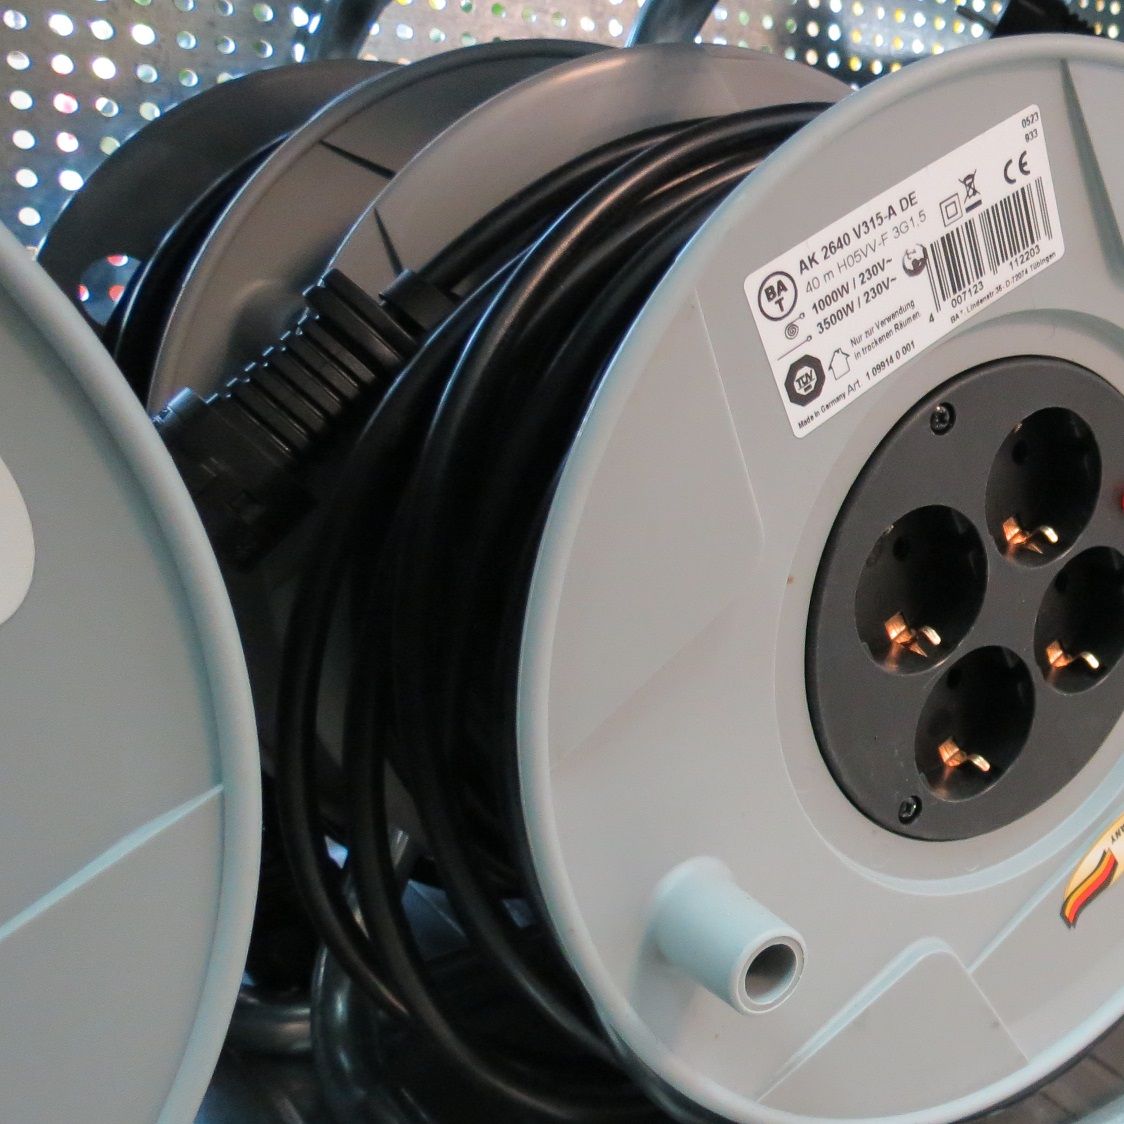 Extension cords and electrical reels